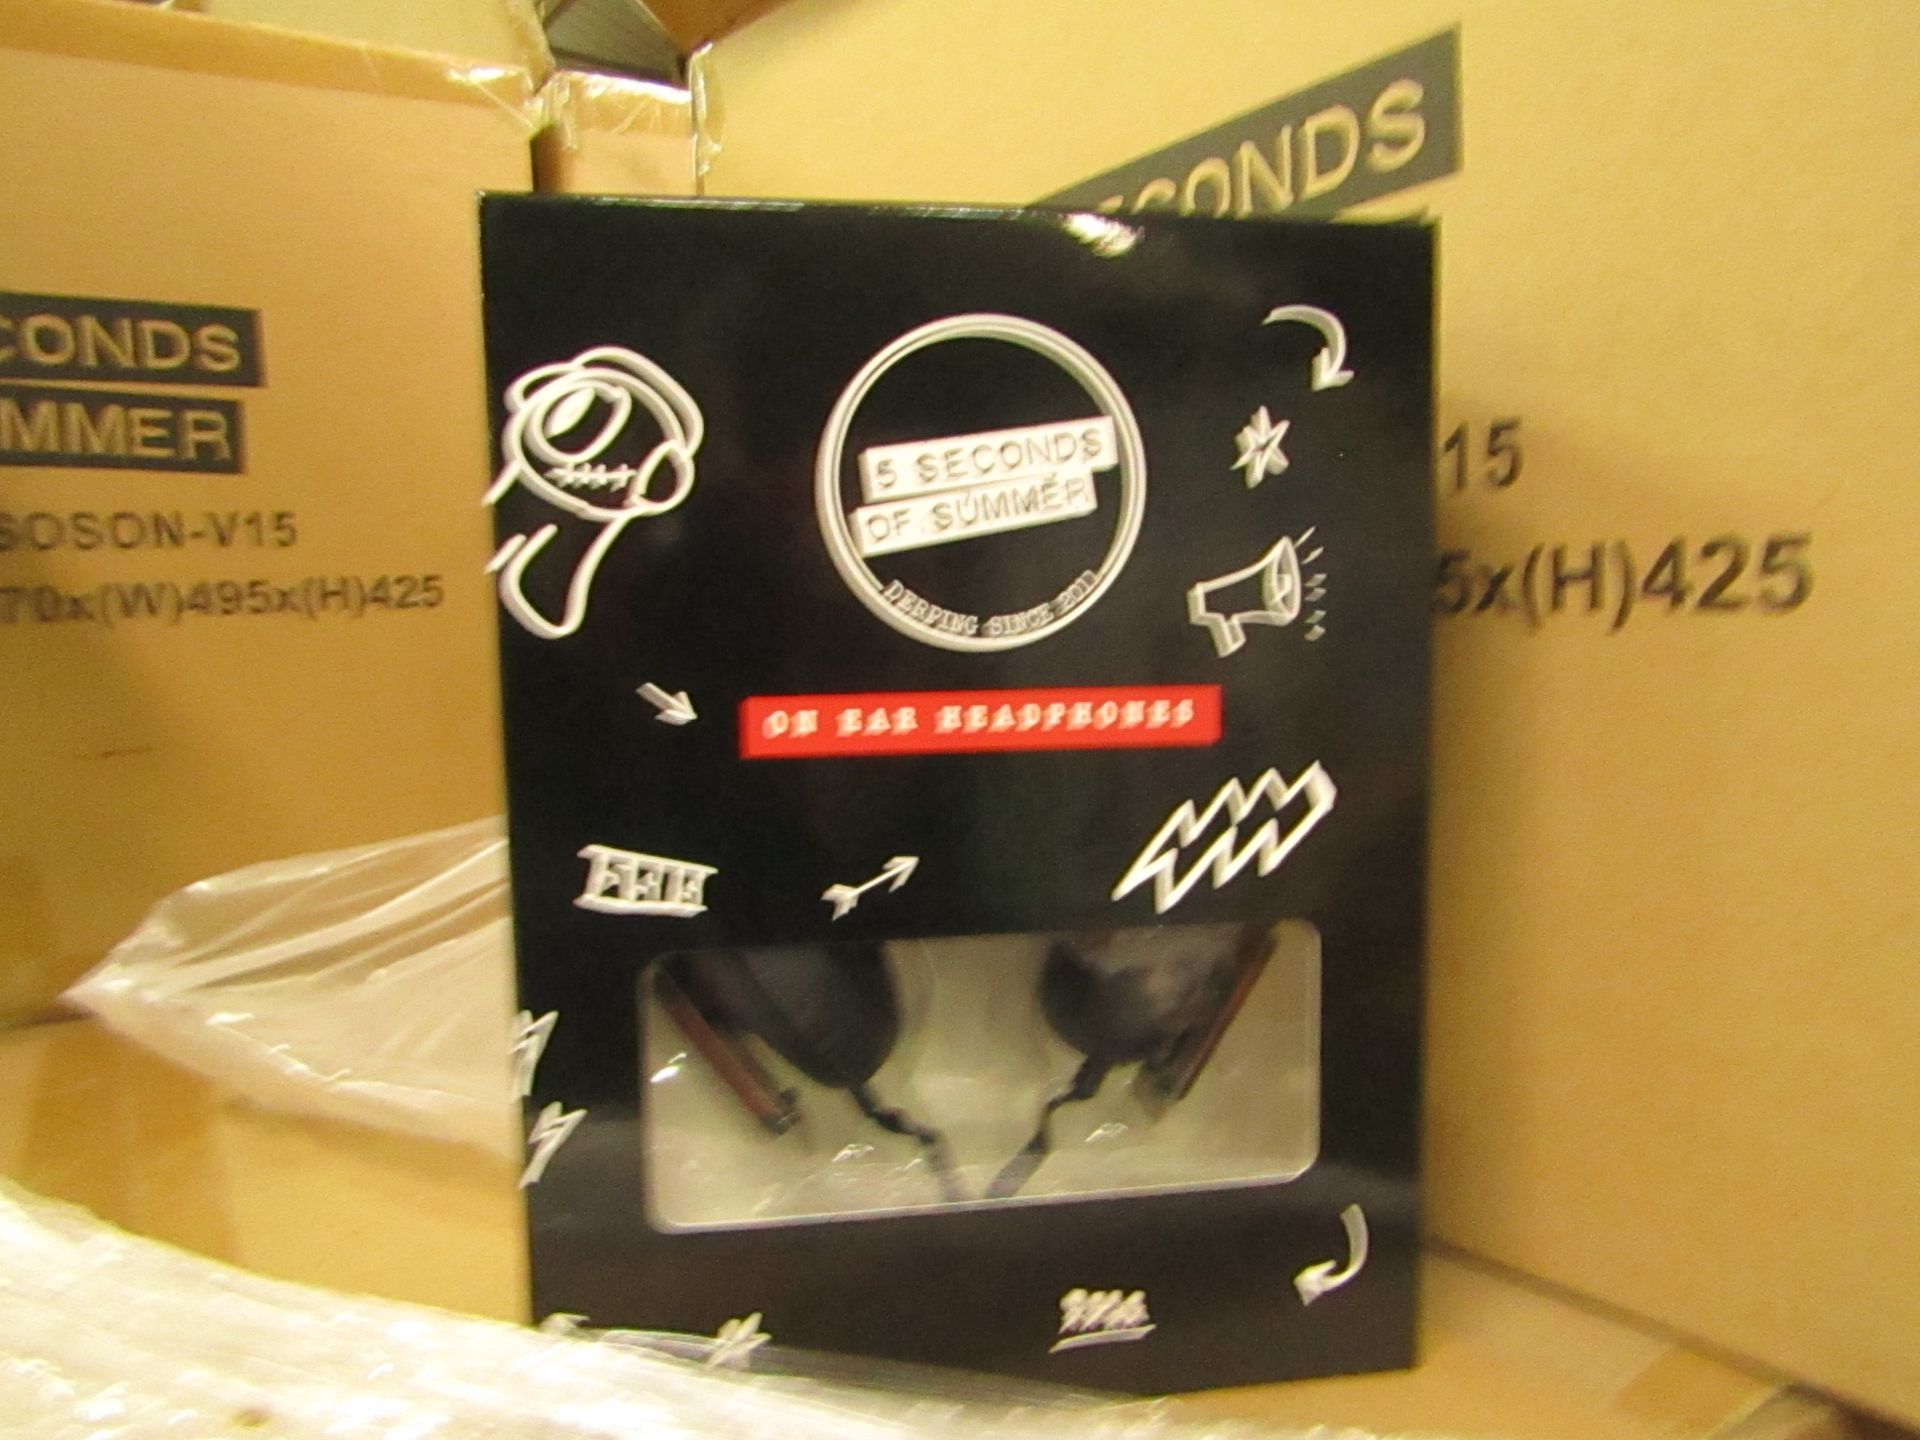 5 Seconds of summer headphones - New & Boxed